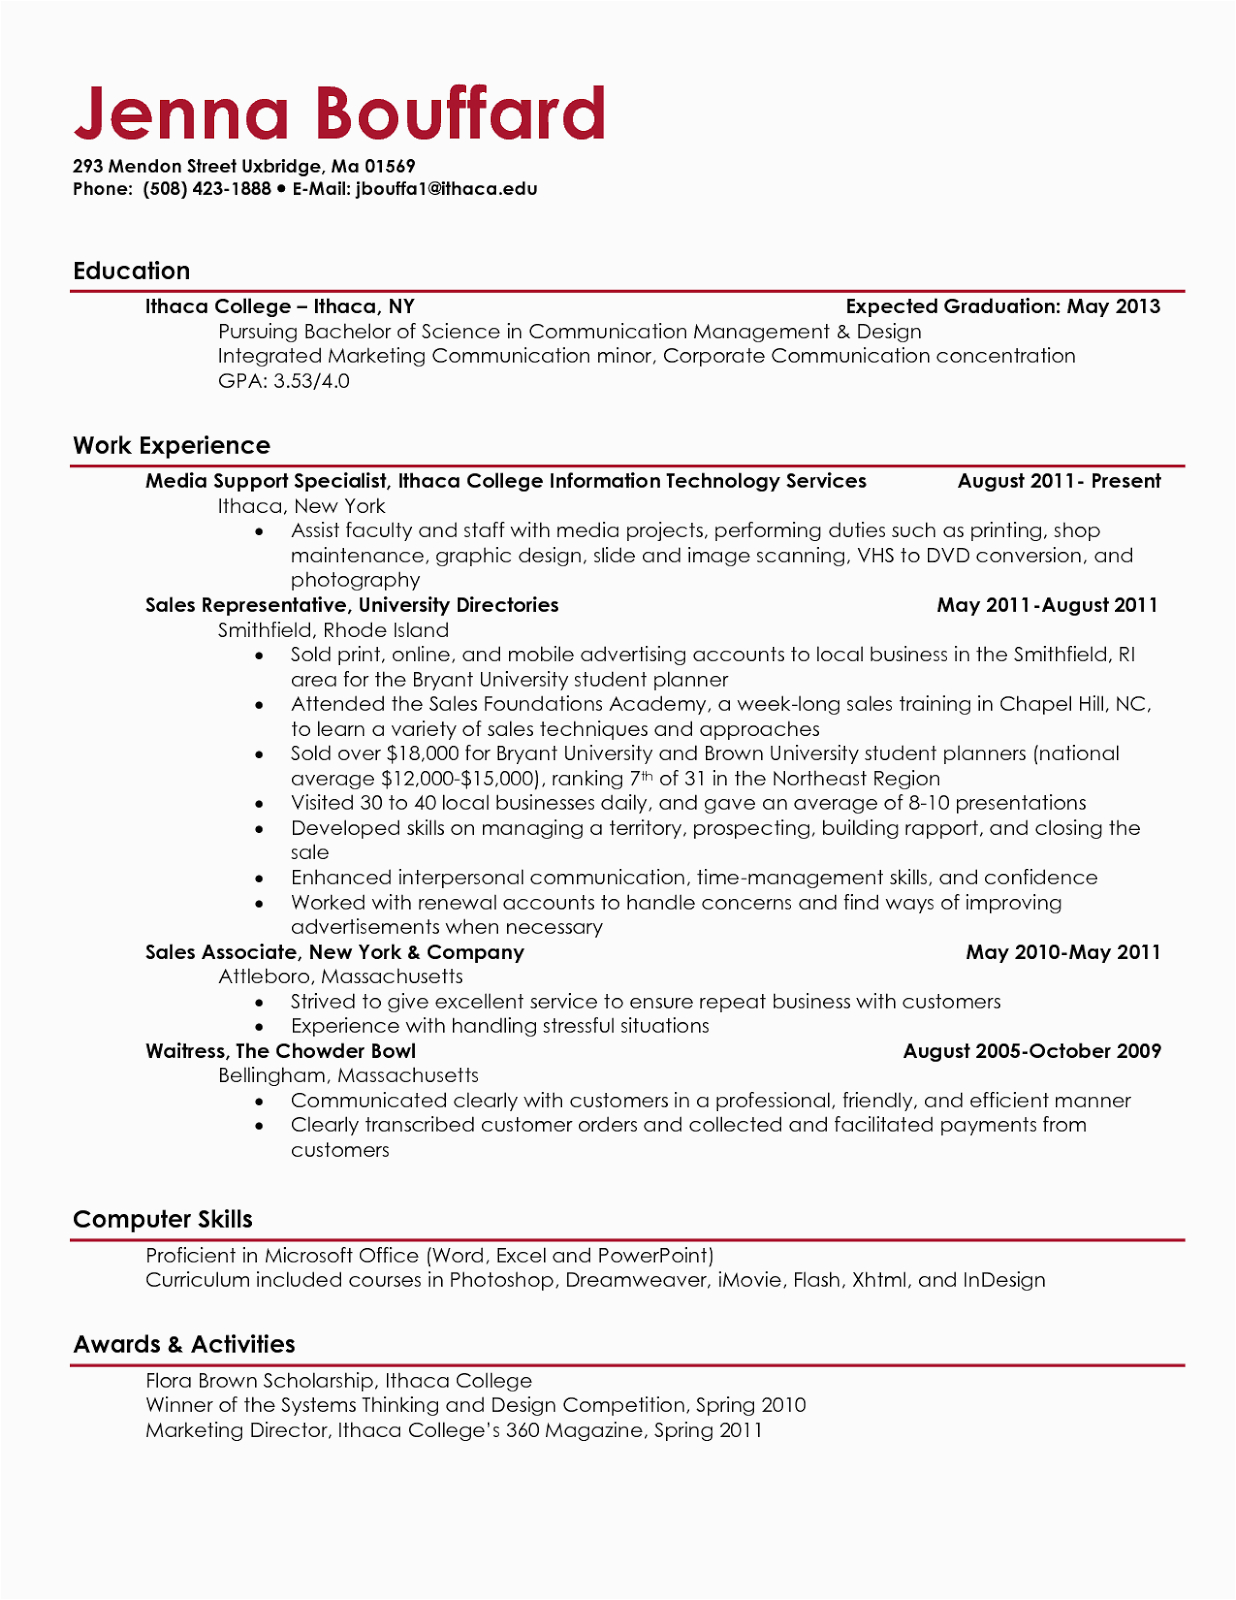 Sample Resume Skills for College Students Samples Of Resumes for College Students